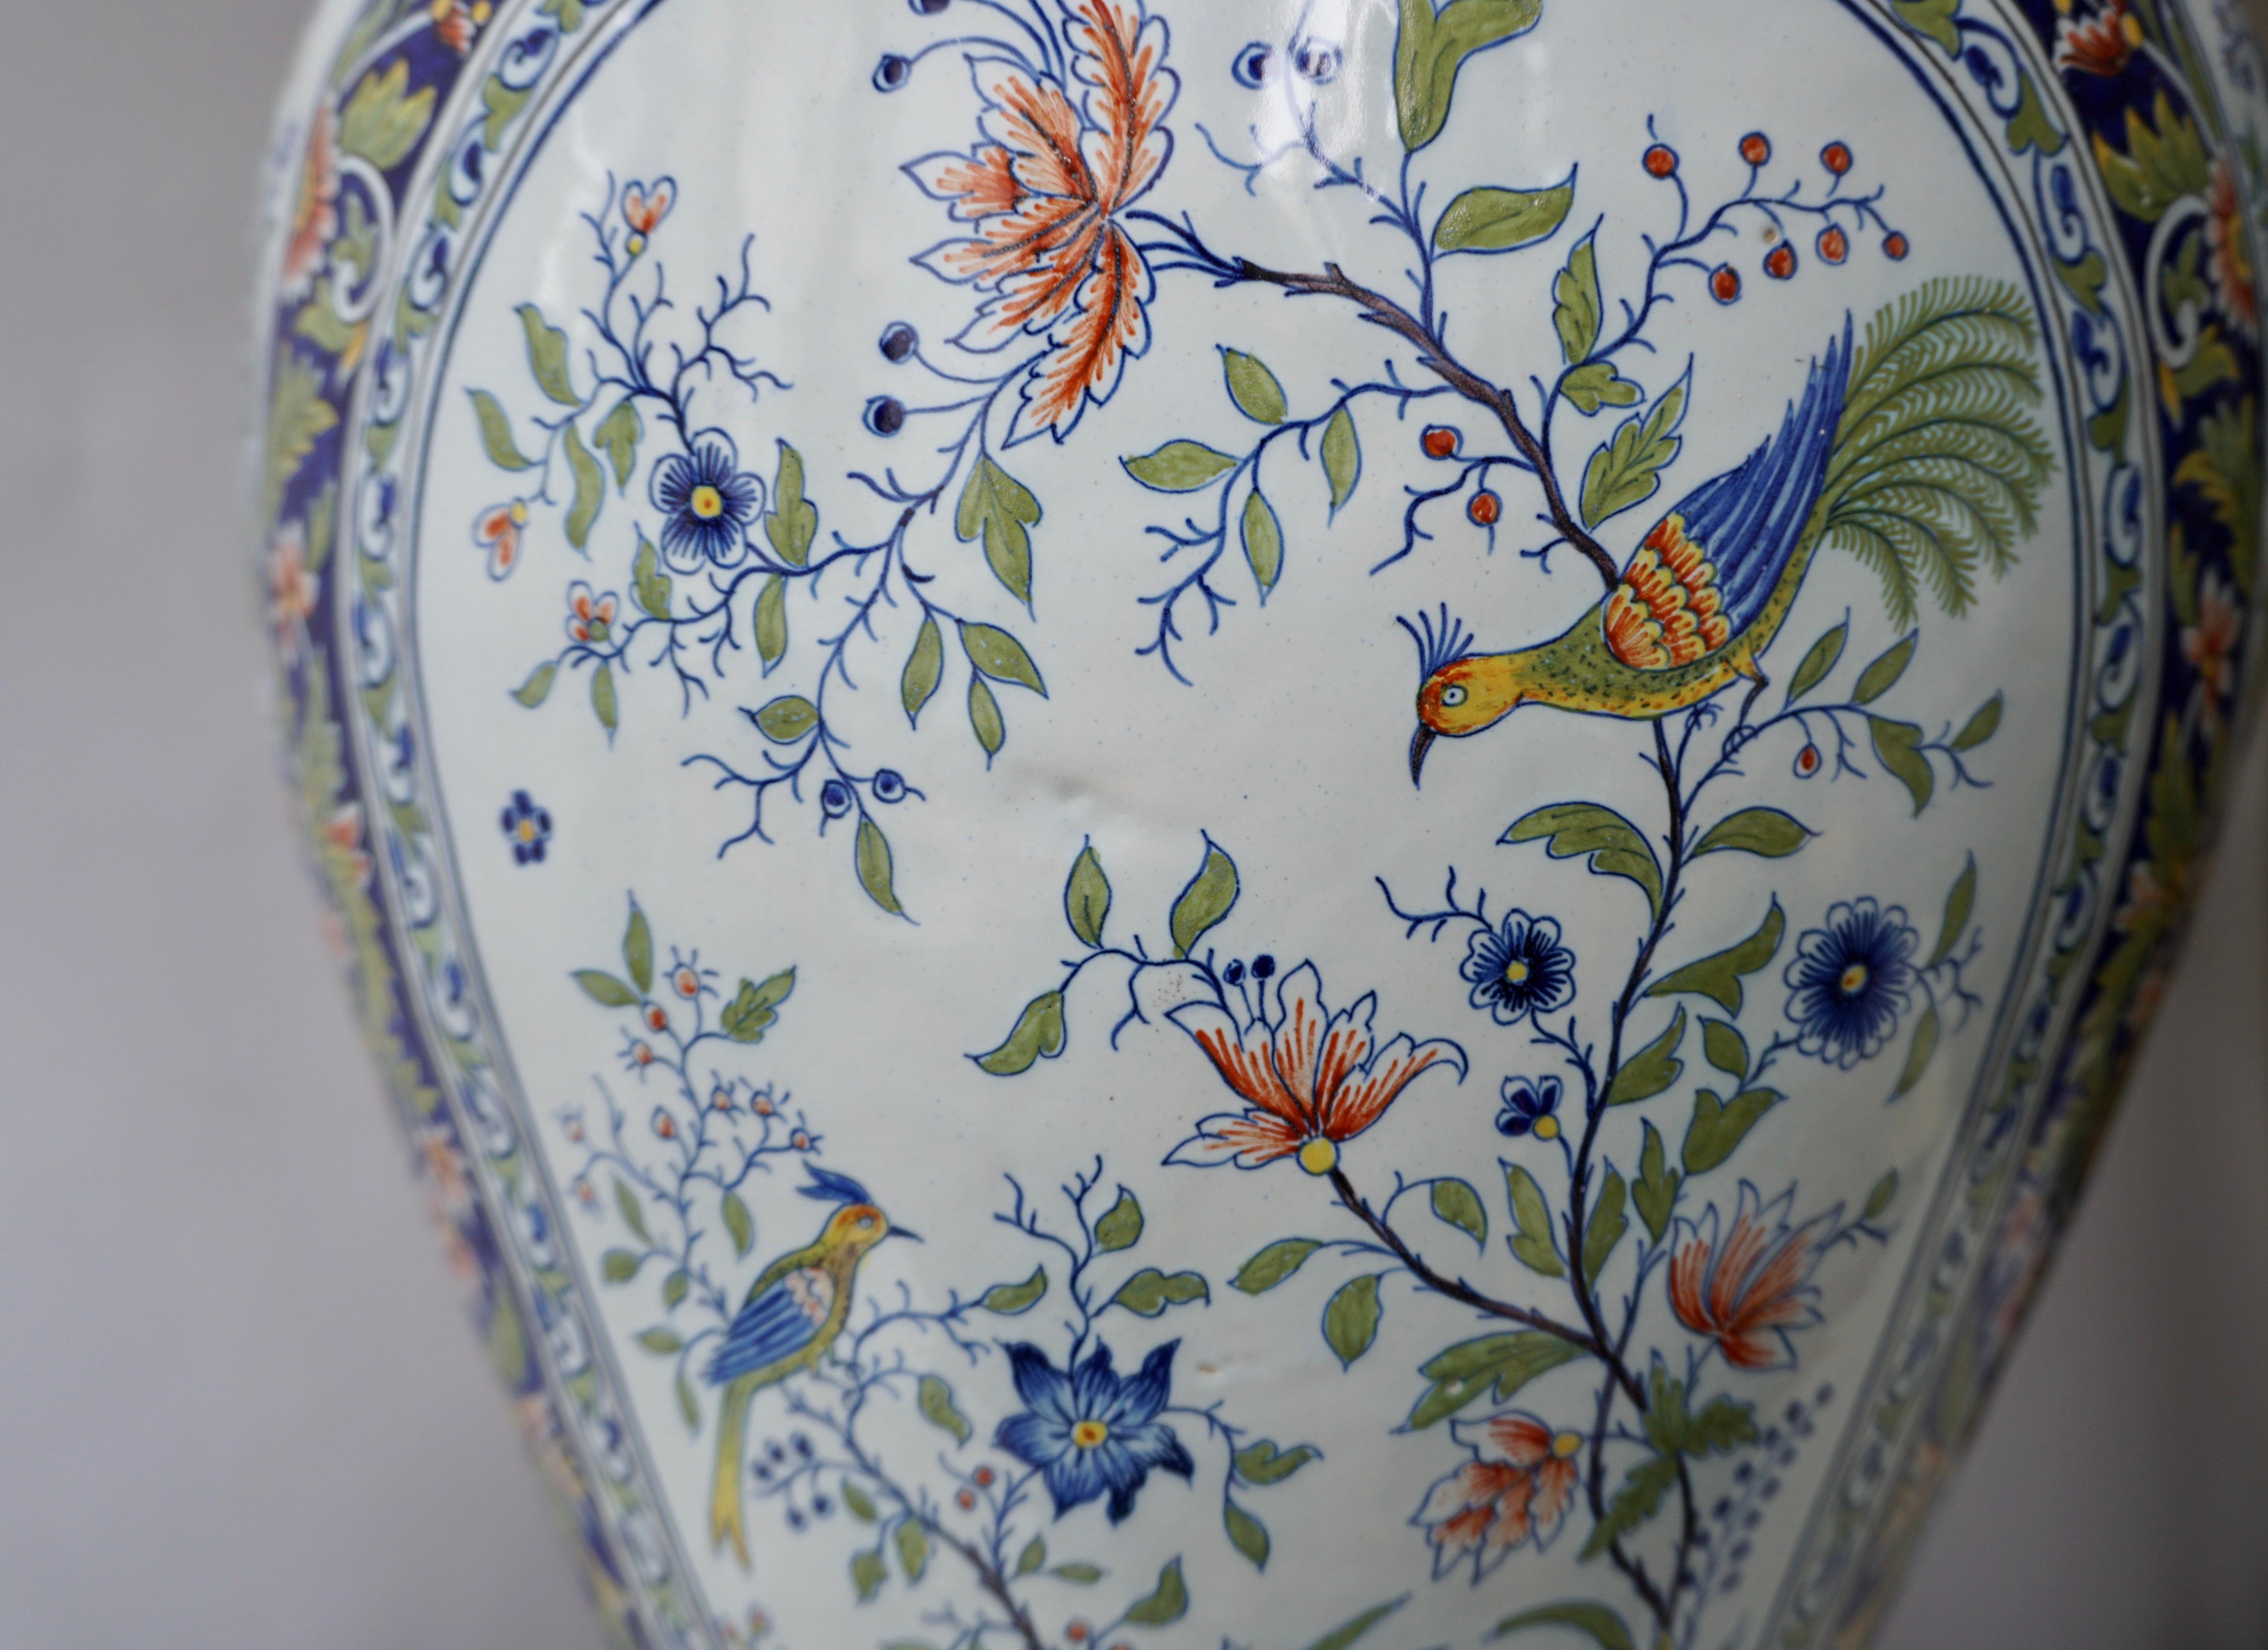 Ceramic French Hand Painted Faience Urn or Vase with Flowers and Birds Motifs